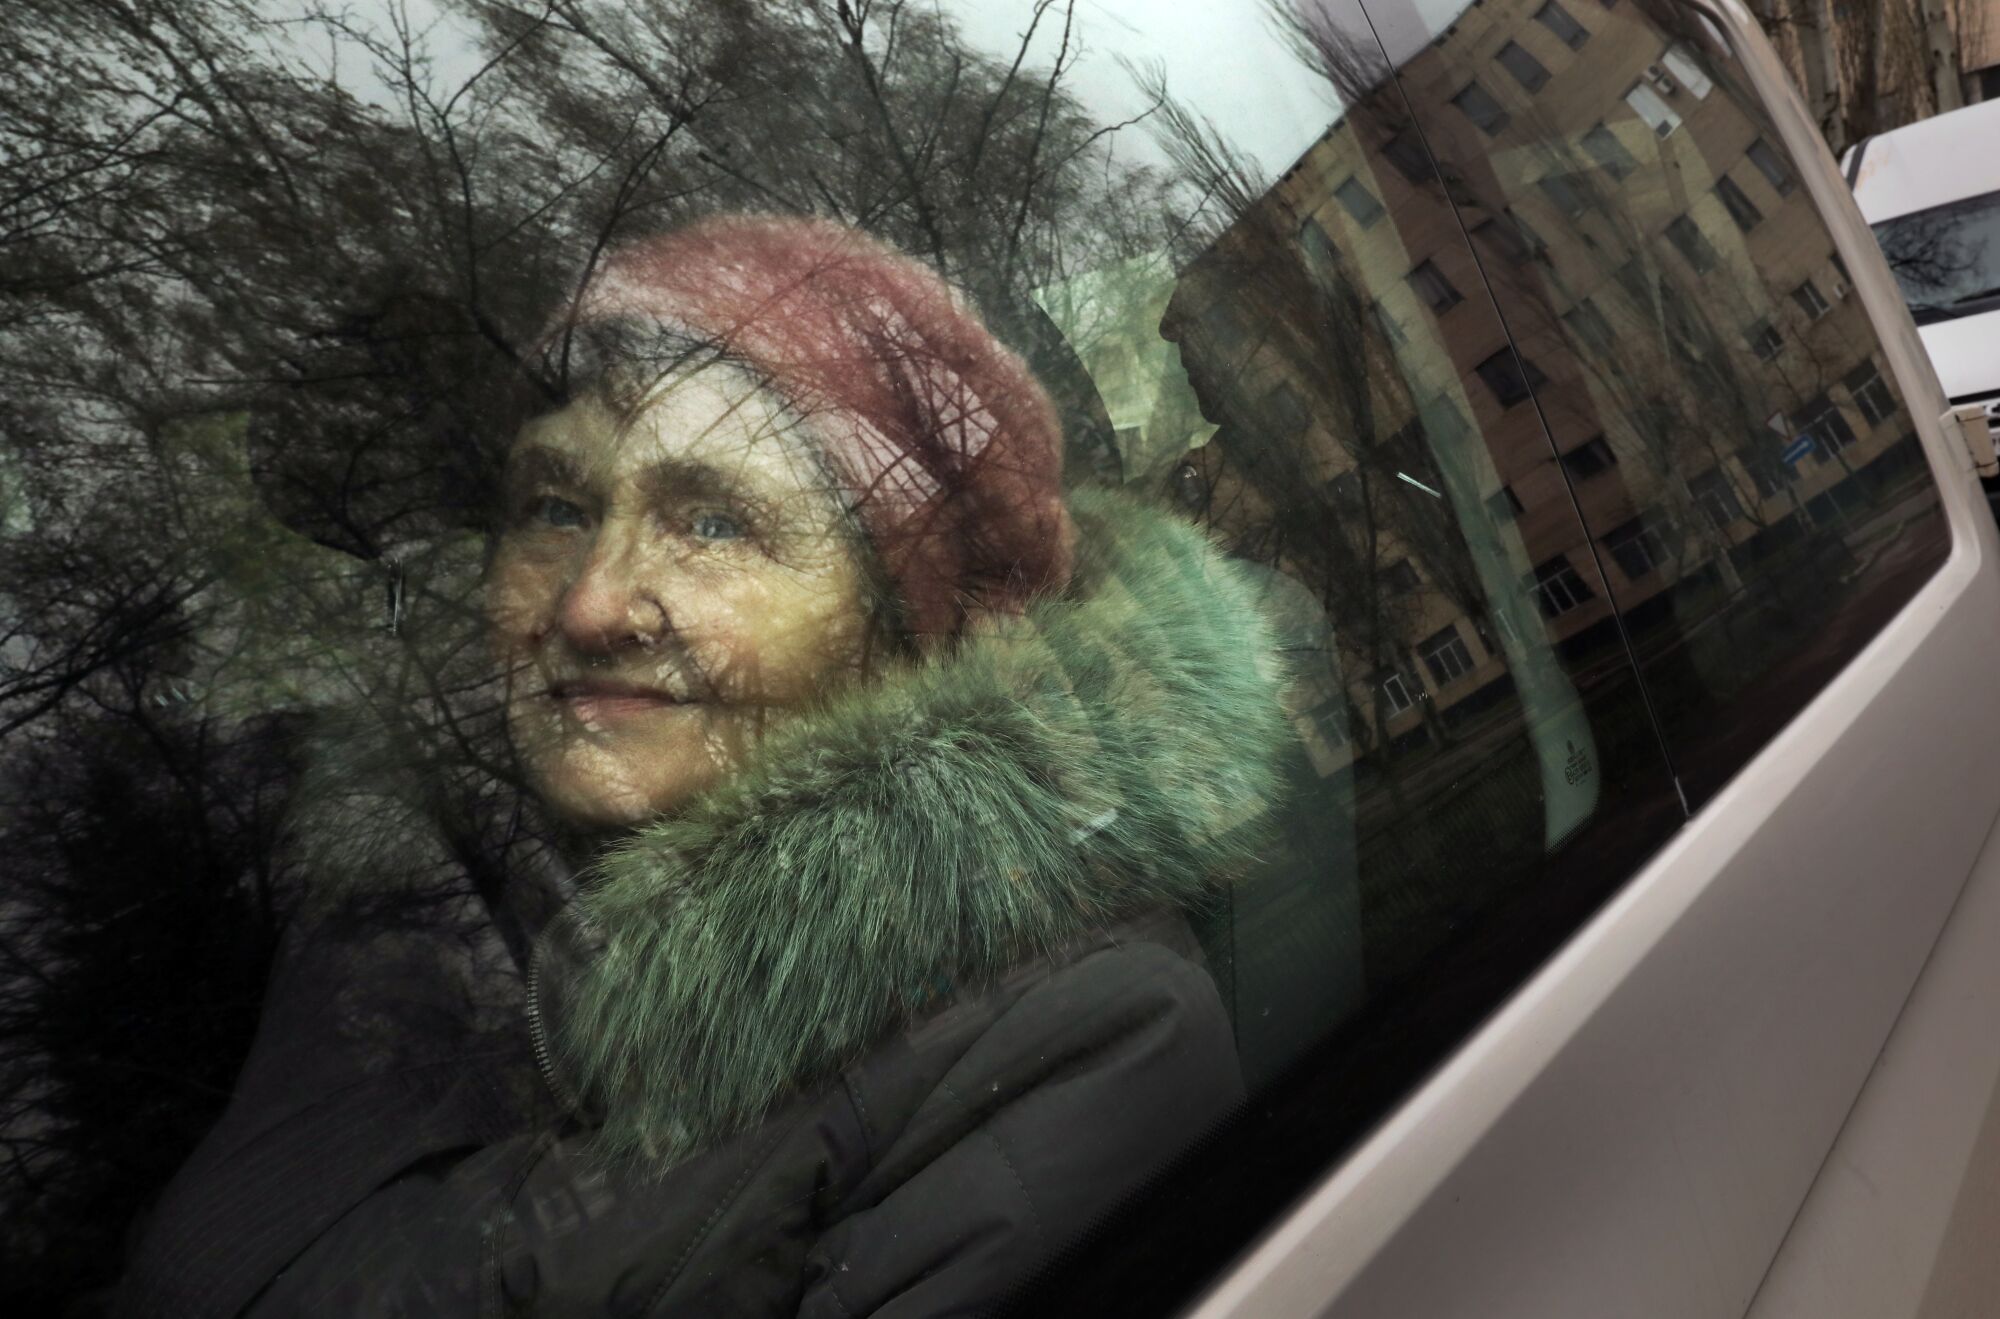 A woman looks out a vehicle window, which also reflects the trees outside